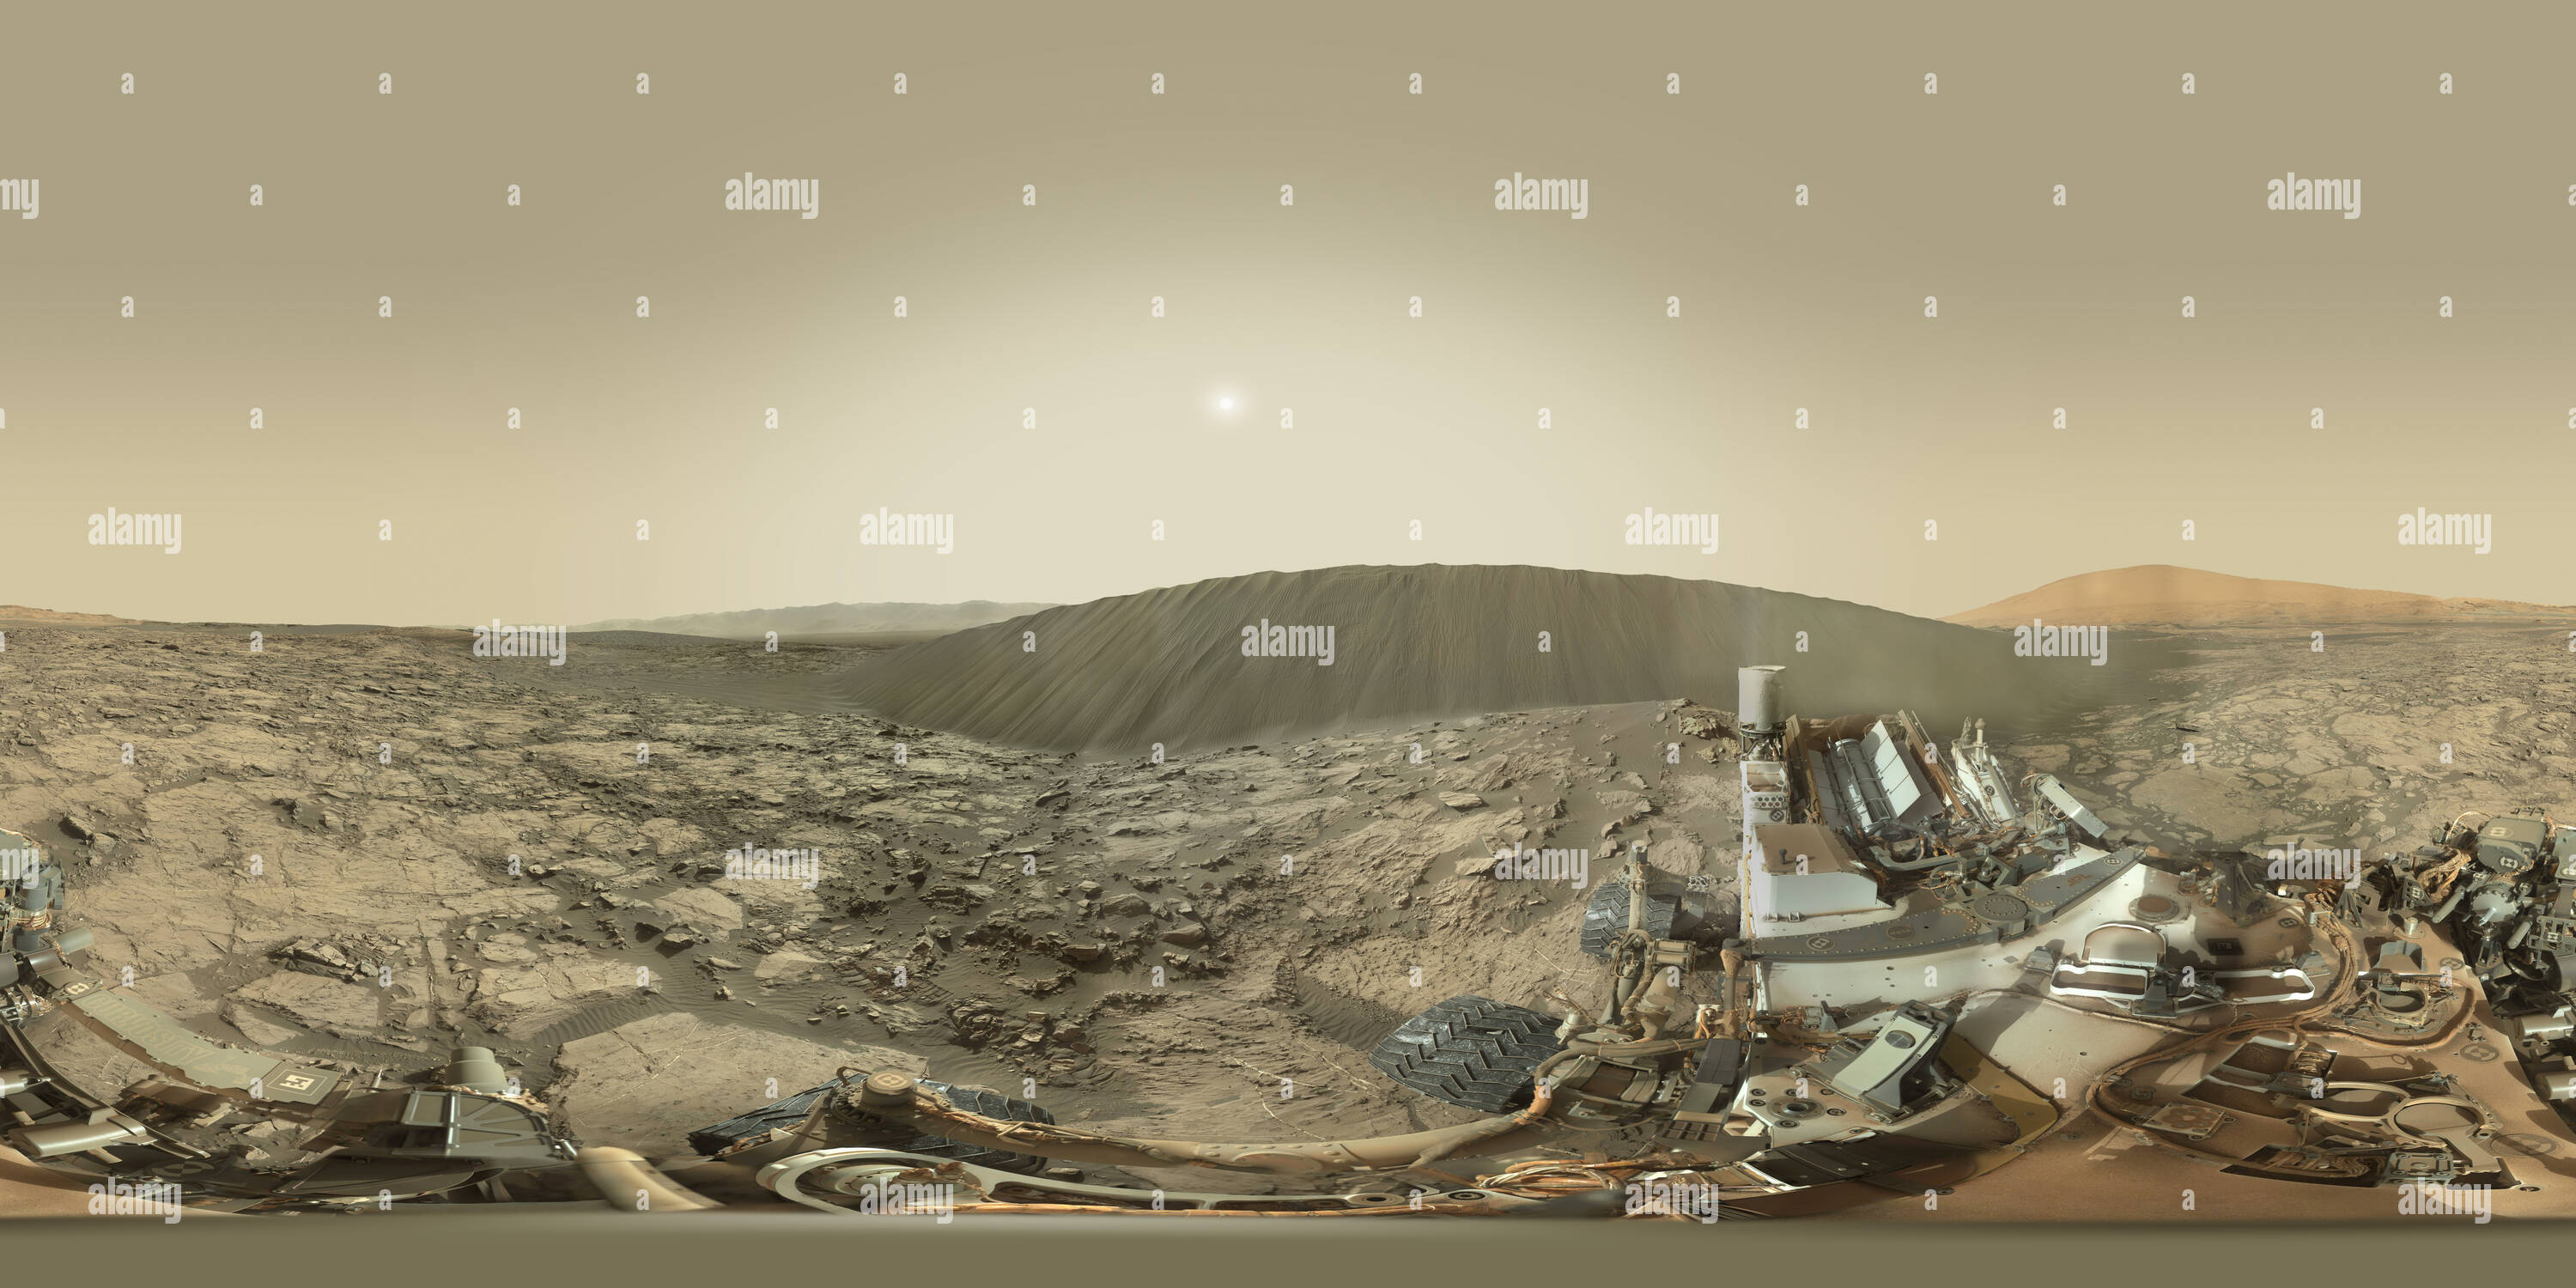 360 degree panoramic view of Mars Panorama - Curiosity rover: Martian solar day 1197